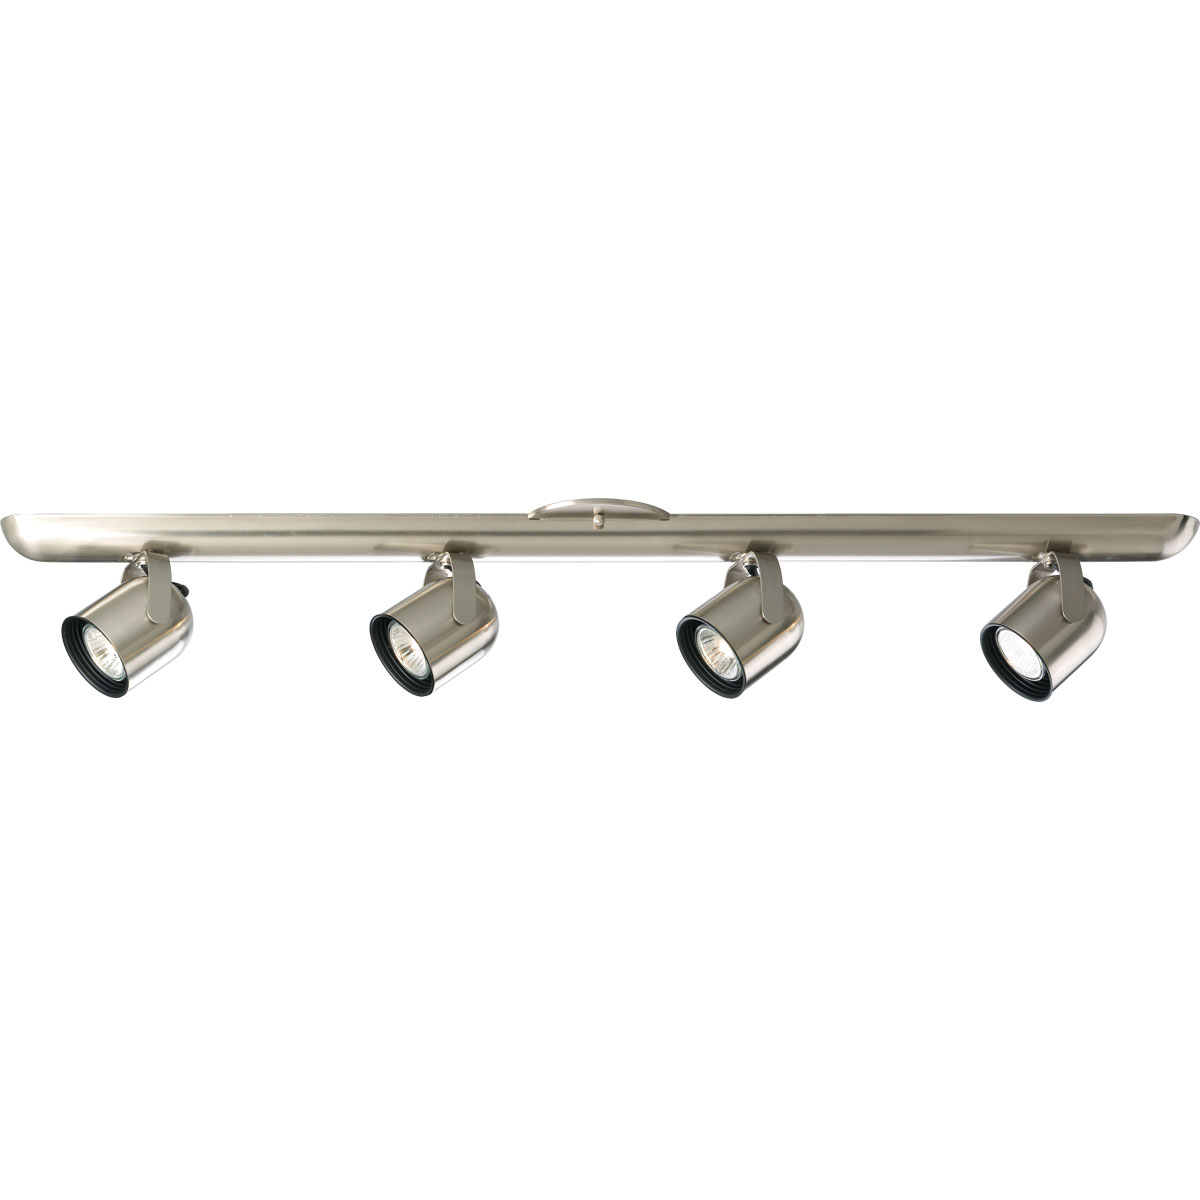 Four-light round back wall or ceiling mount directional. Transitional design in a Brushed Nickel finish will be a stylish complement to your decor. Four independently adjustable track heads to direct and focus light where needed - track heads rotate 350-degrees and has a 60-degree tilt. MR16 bulbs included.